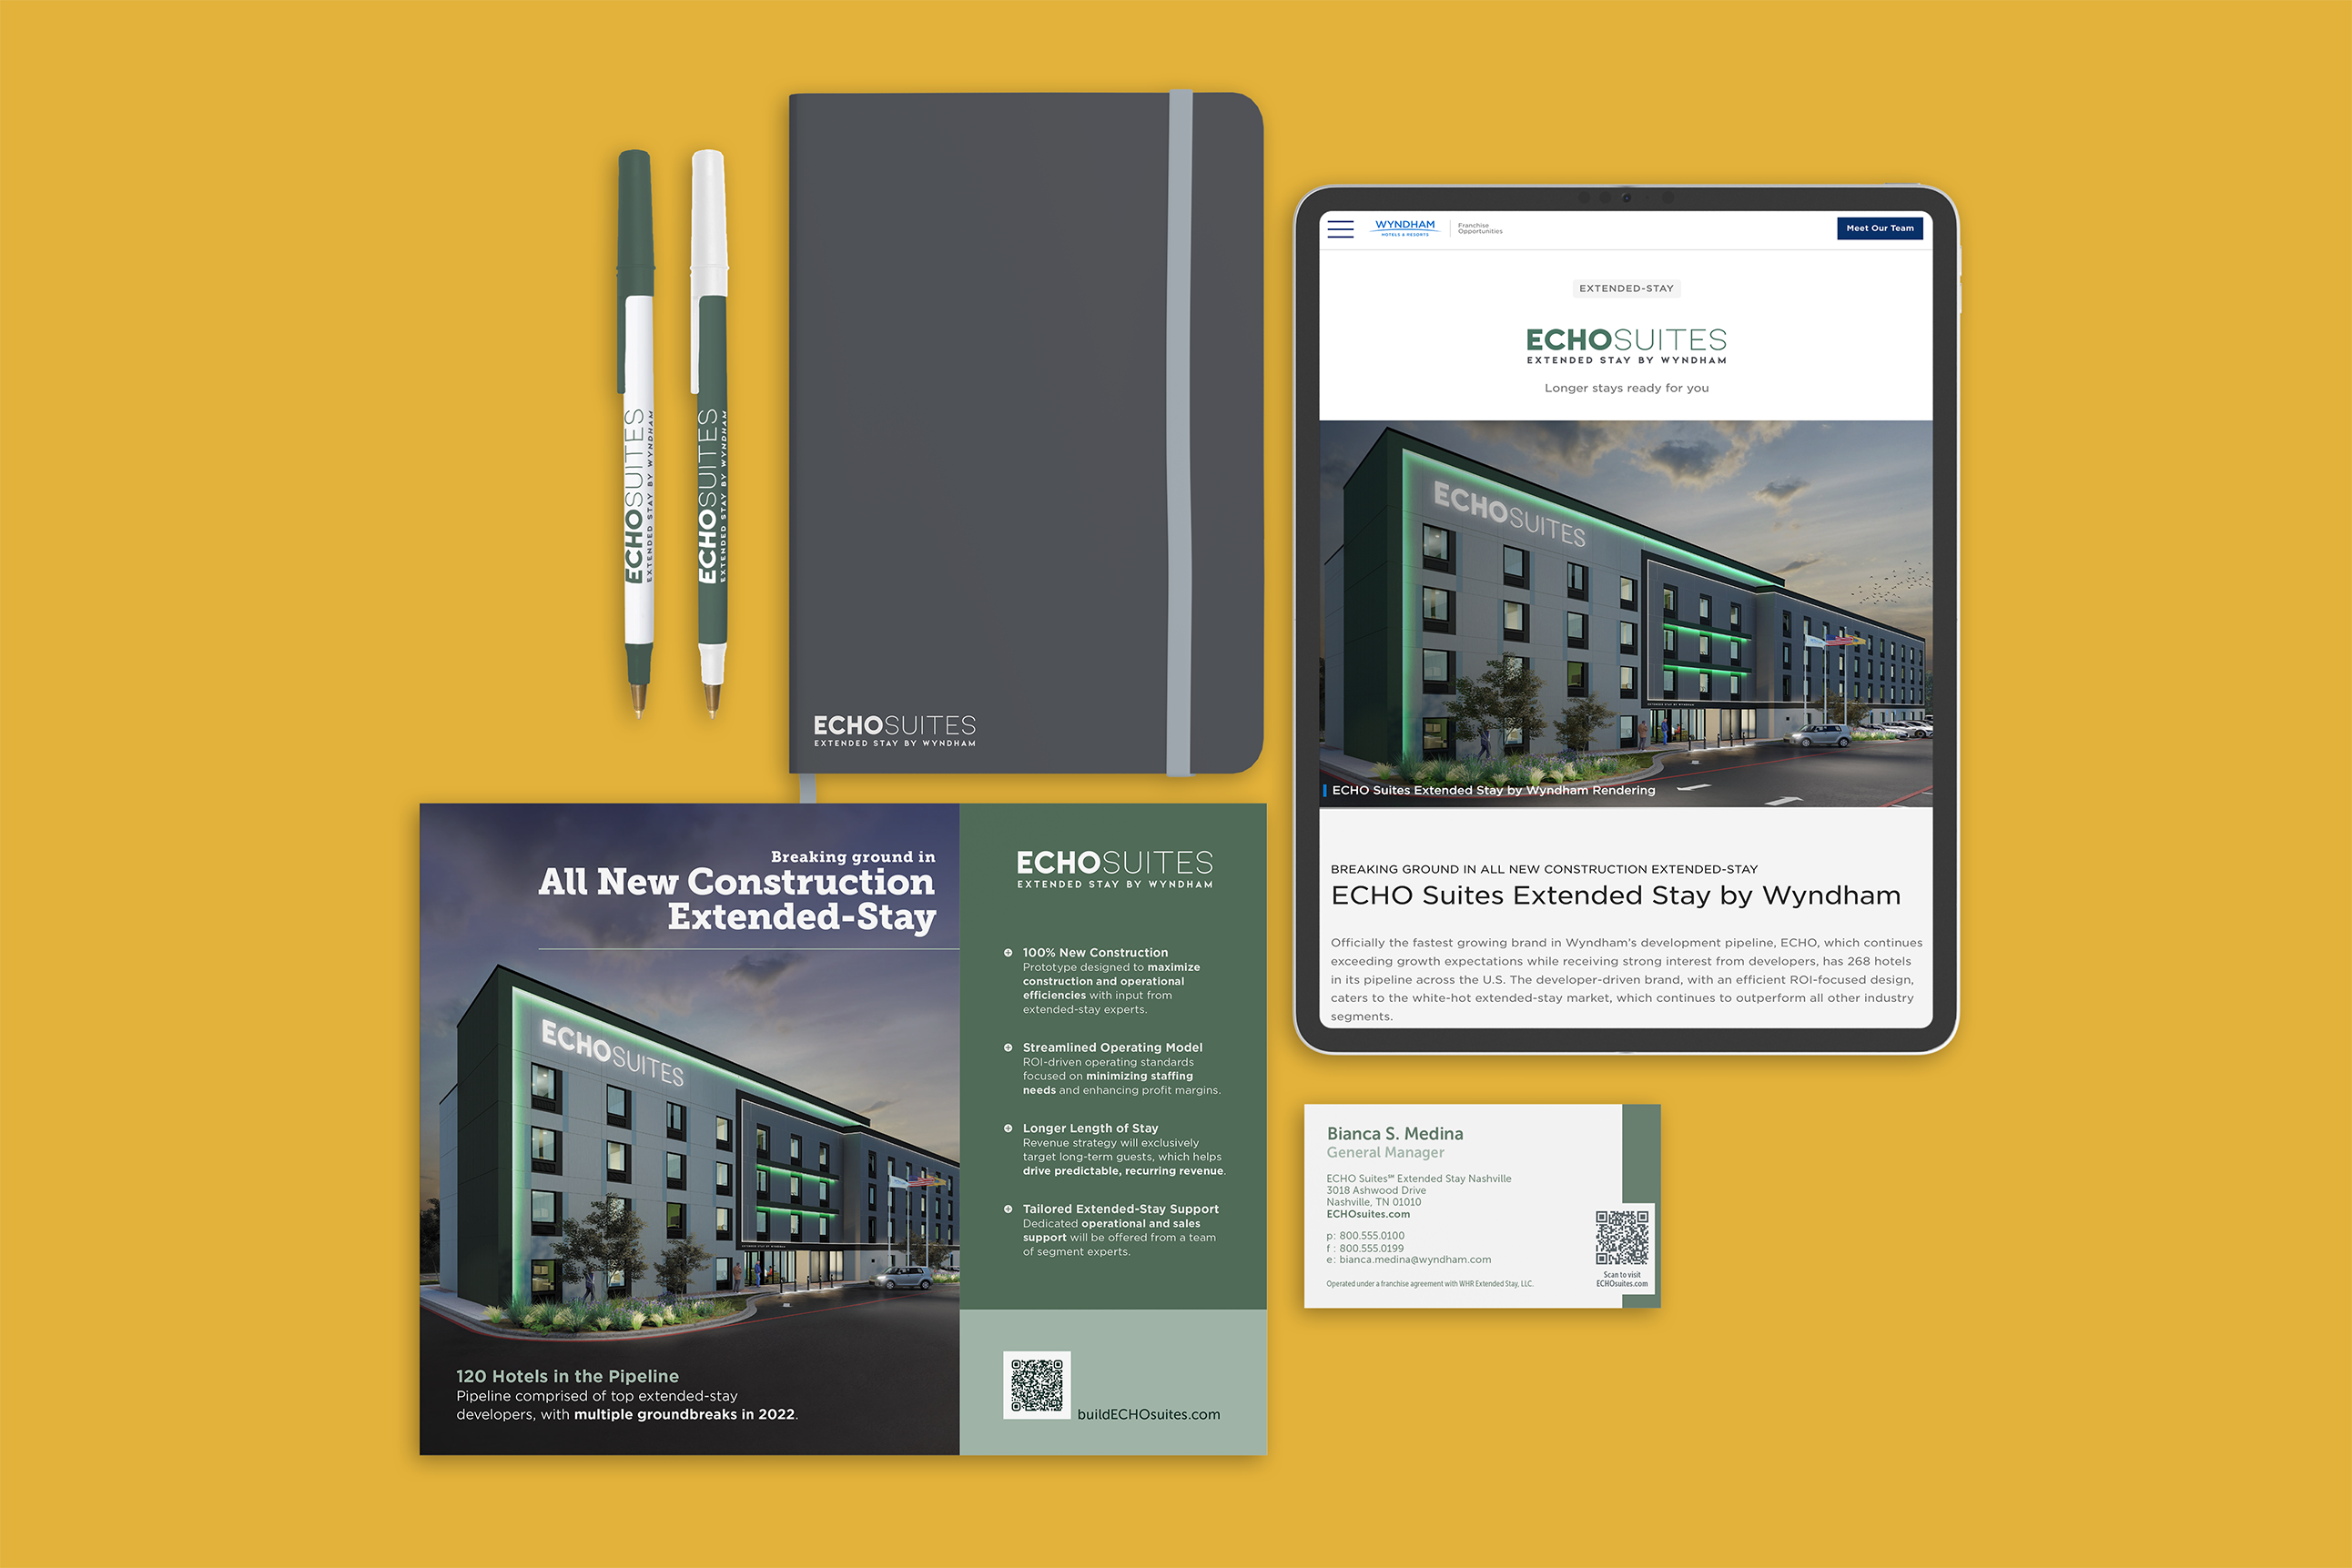 Echo Suites collateral items: pens, notebook, postcard, website, and business card